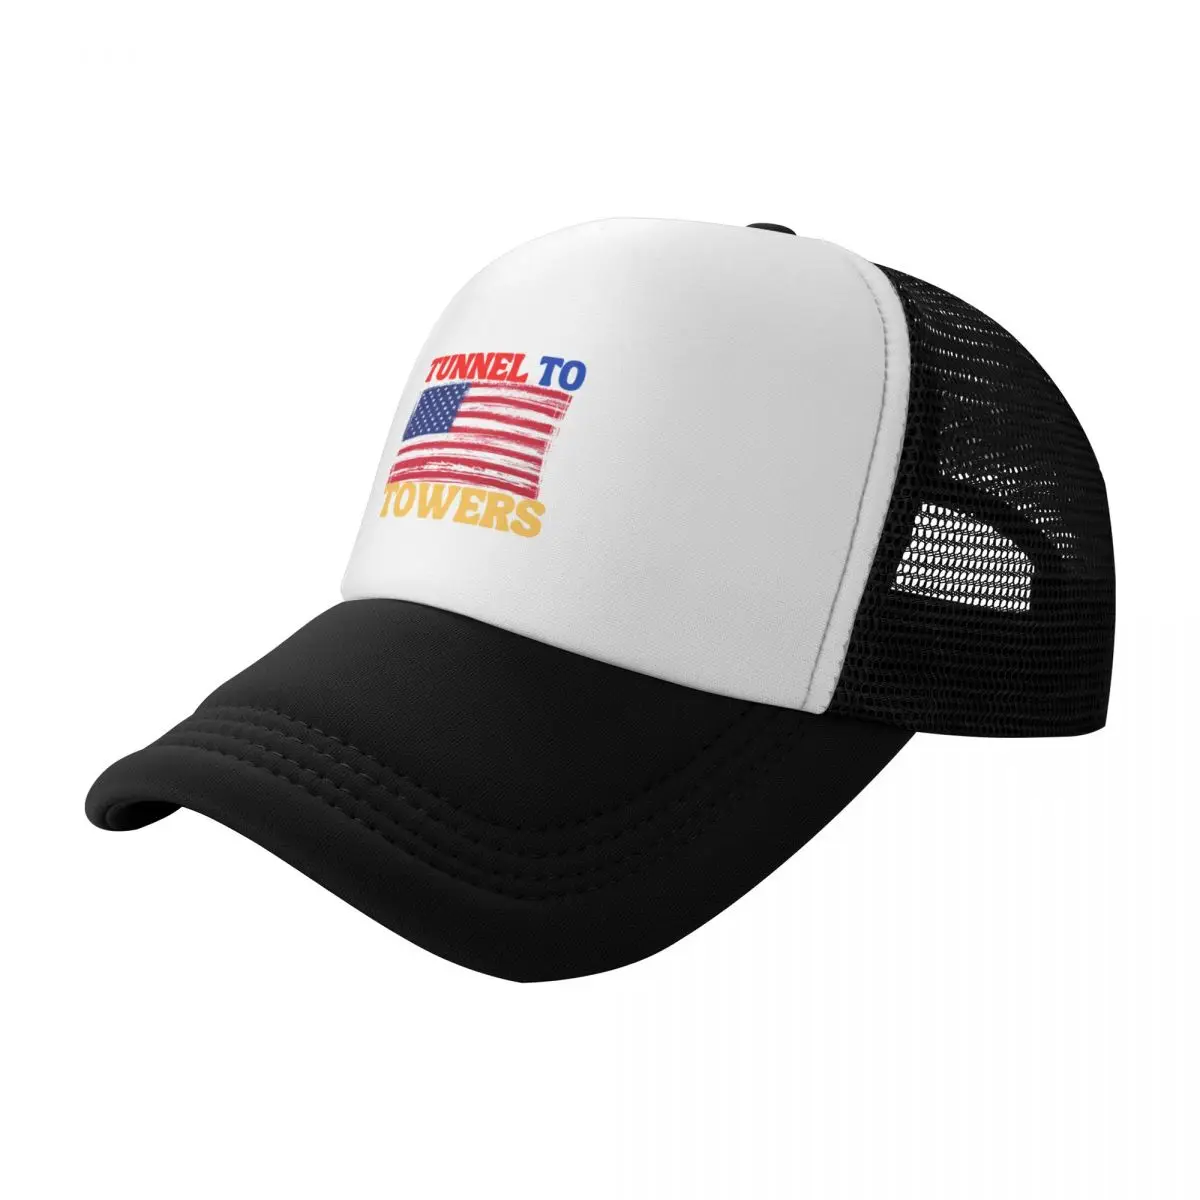 

Stephen miller tunnel to towers foundation, tunnel to towers Baseball Cap Golf Hat Sun Cap Hip Hop Gentleman Hat Girl Men's